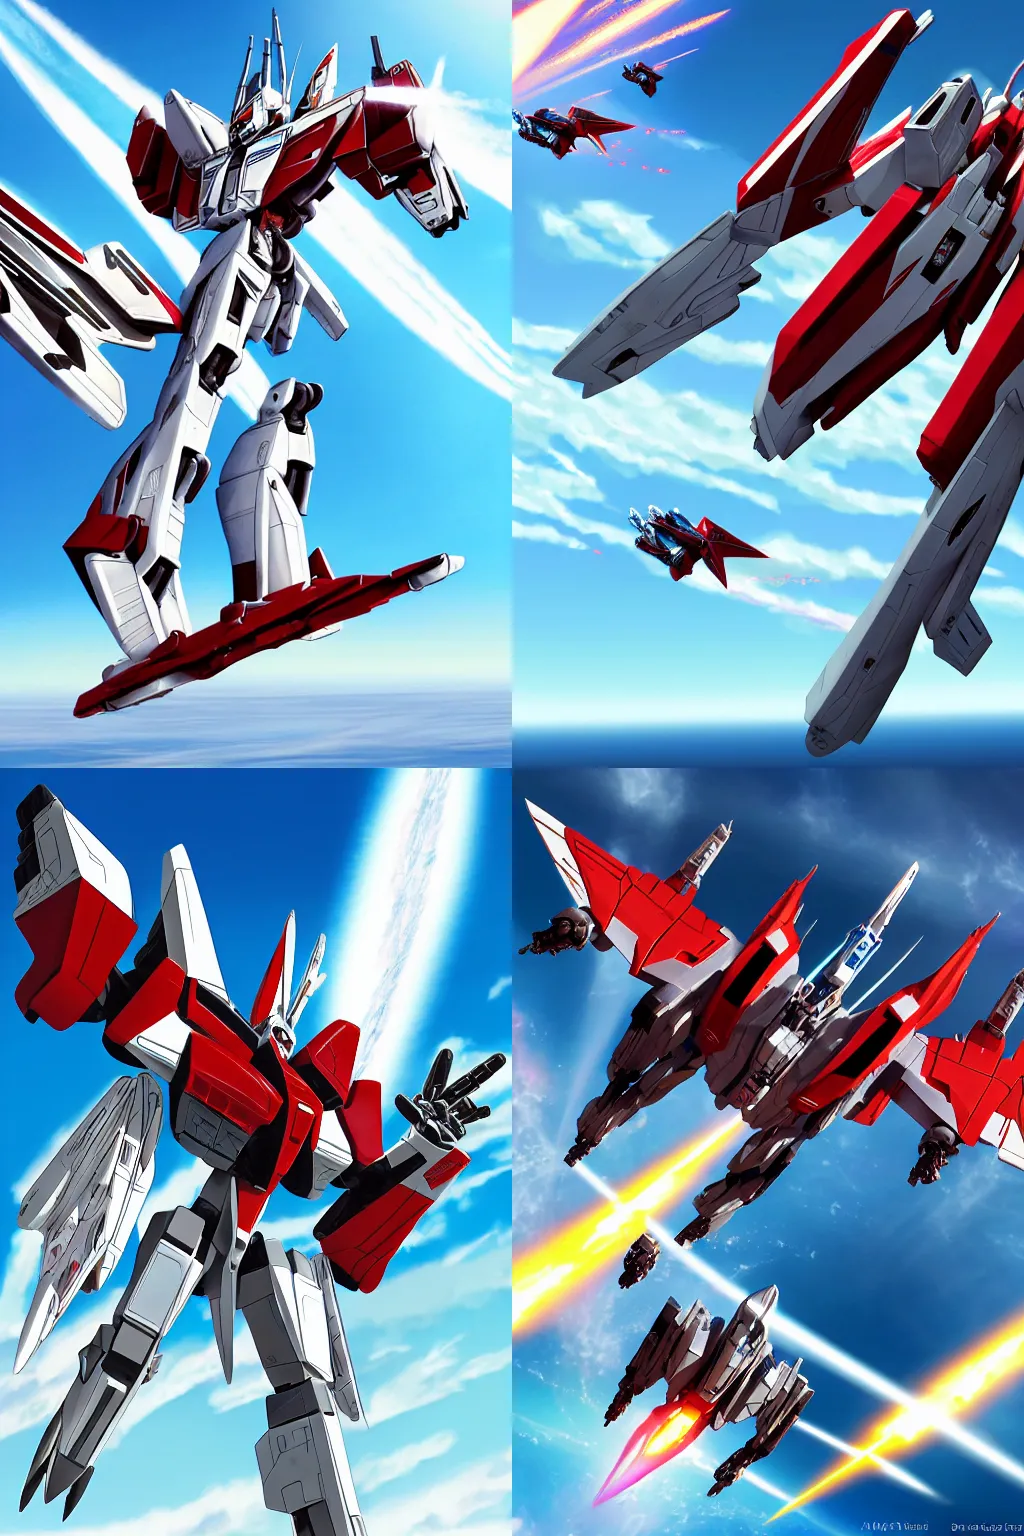 Prompt: Flight shot of Jetfire from Transformers on a clear sunny day with a blue sky, Transformers Armada, Unicron Trilogy, Jetfire, Skyfire, Battroid Mode, Anime, Robots, Robot, Robot Mode, 8k, ultra realistic, illustration, splash art, Macross Delta Splash Art, Macross Delta, Macross Frontier, Macross Frontier Splash Art, Sakuga, robot mode, rule of thirds, good value control